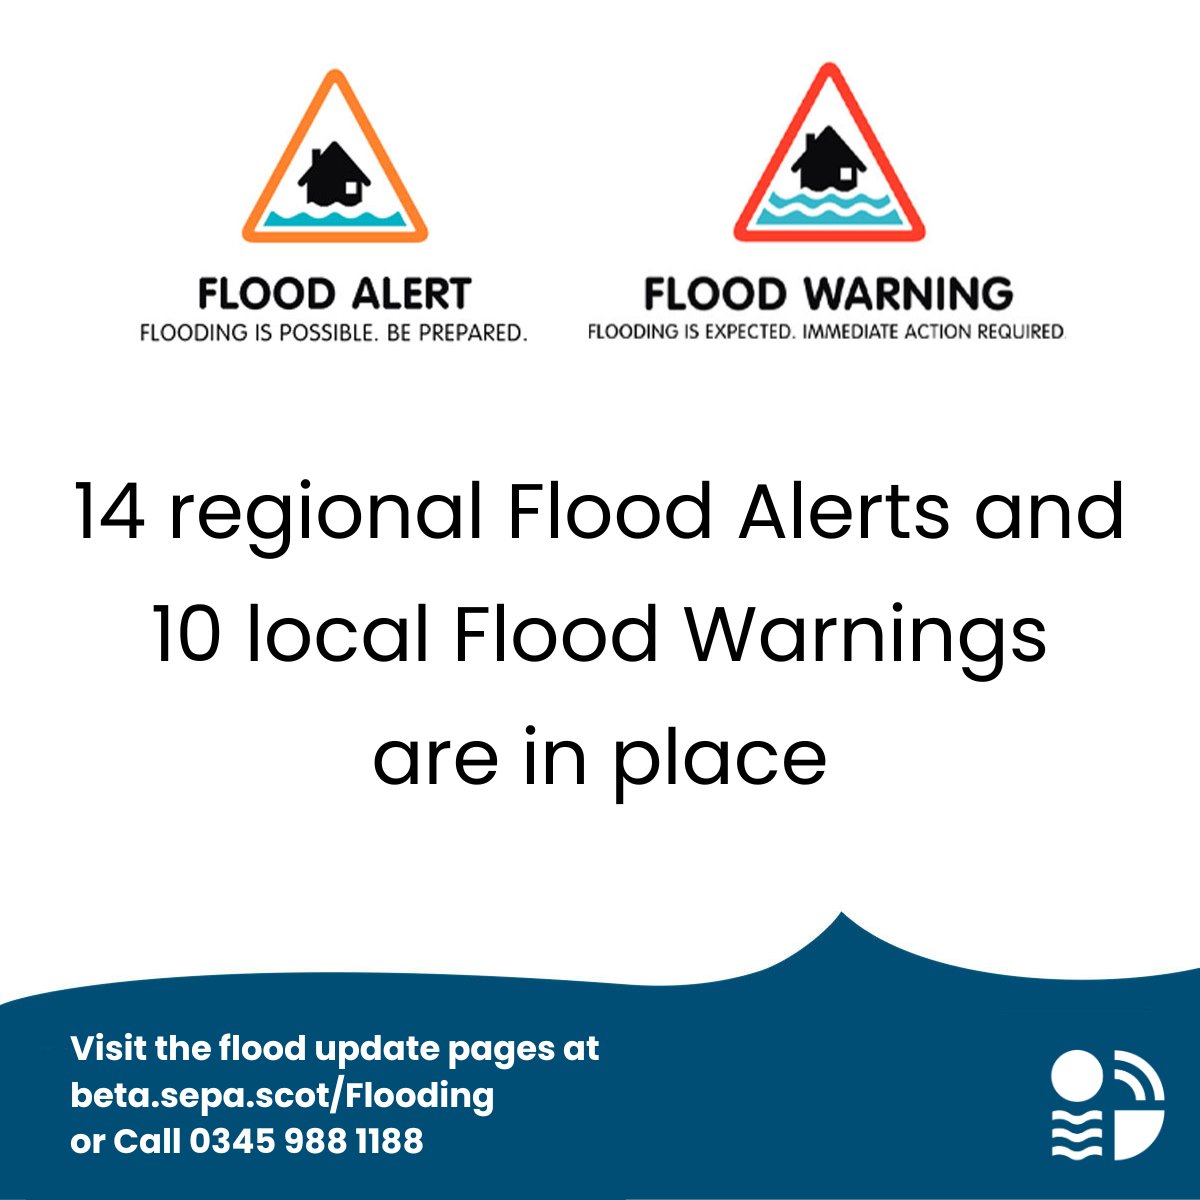 🌧️ Heavy rainfall brings a risk of flooding from rivers and surface water across central, southern and north-eastern parts of Scotland today and tomorrow. 🌊 Coastal impacts are also possible in the Solway Firth, Western Isles and along the east coast due to high spring tides…